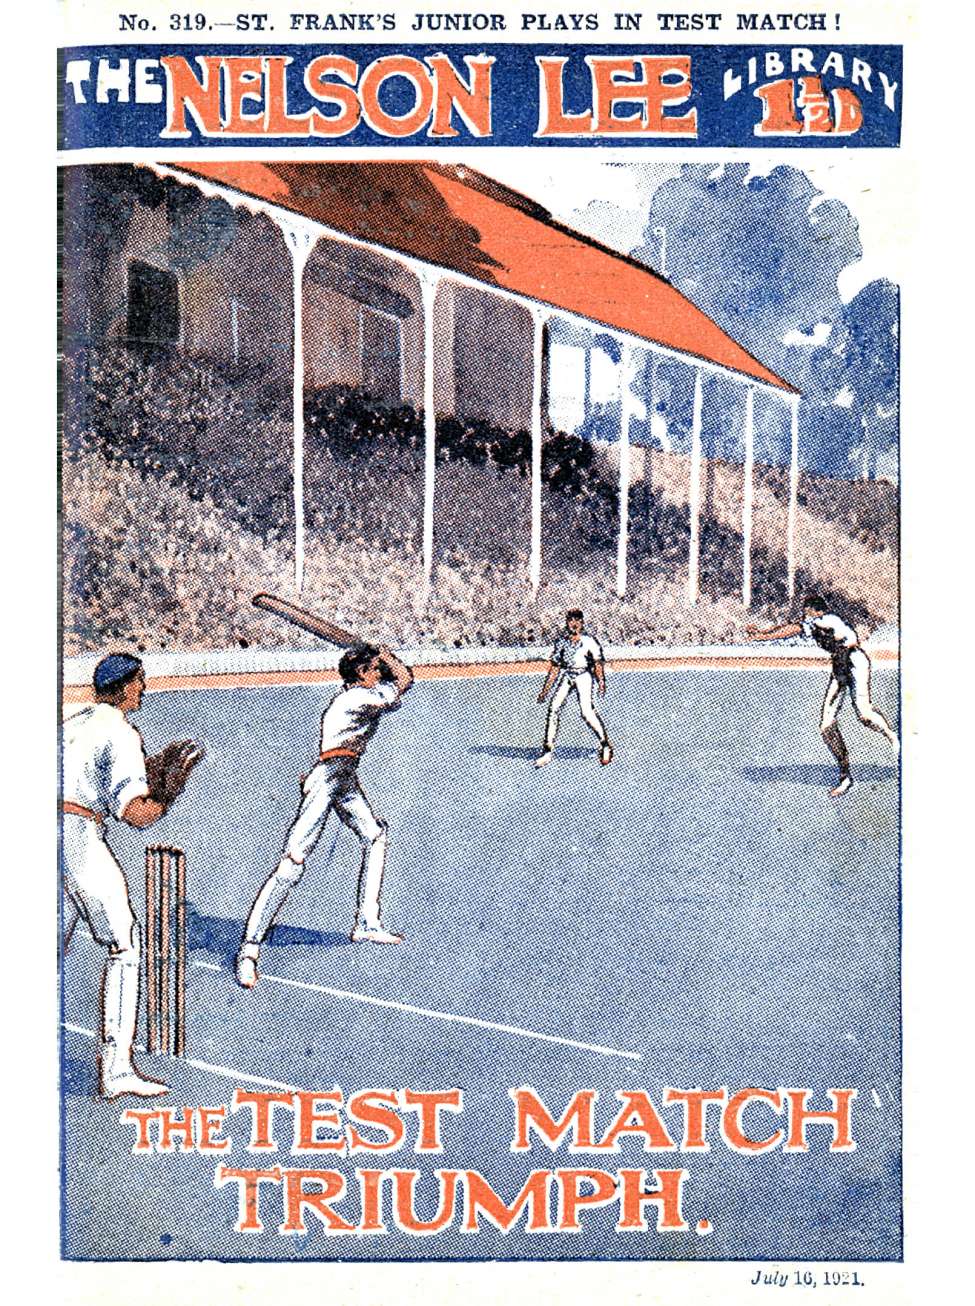 Comic Book Cover For Nelson Lee Library s1 319 - The Test Match Triumph